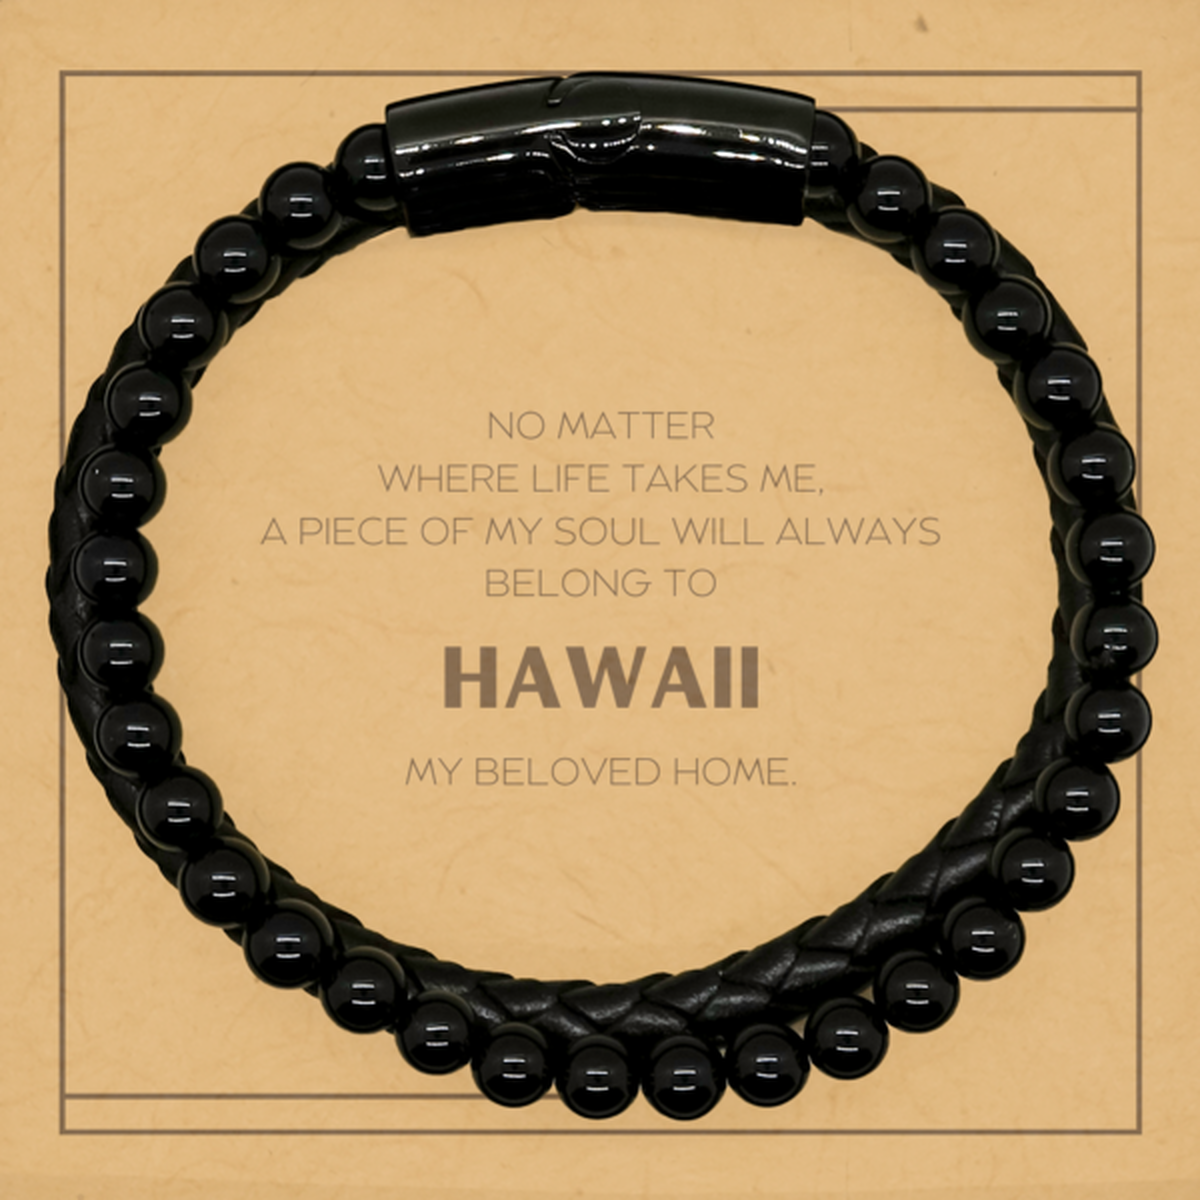 Love Hawaii State Gifts, My soul will always belong to Hawaii, Proud Stone Leather Bracelets, Birthday Unique Gifts For Hawaii Men, Women, Friends